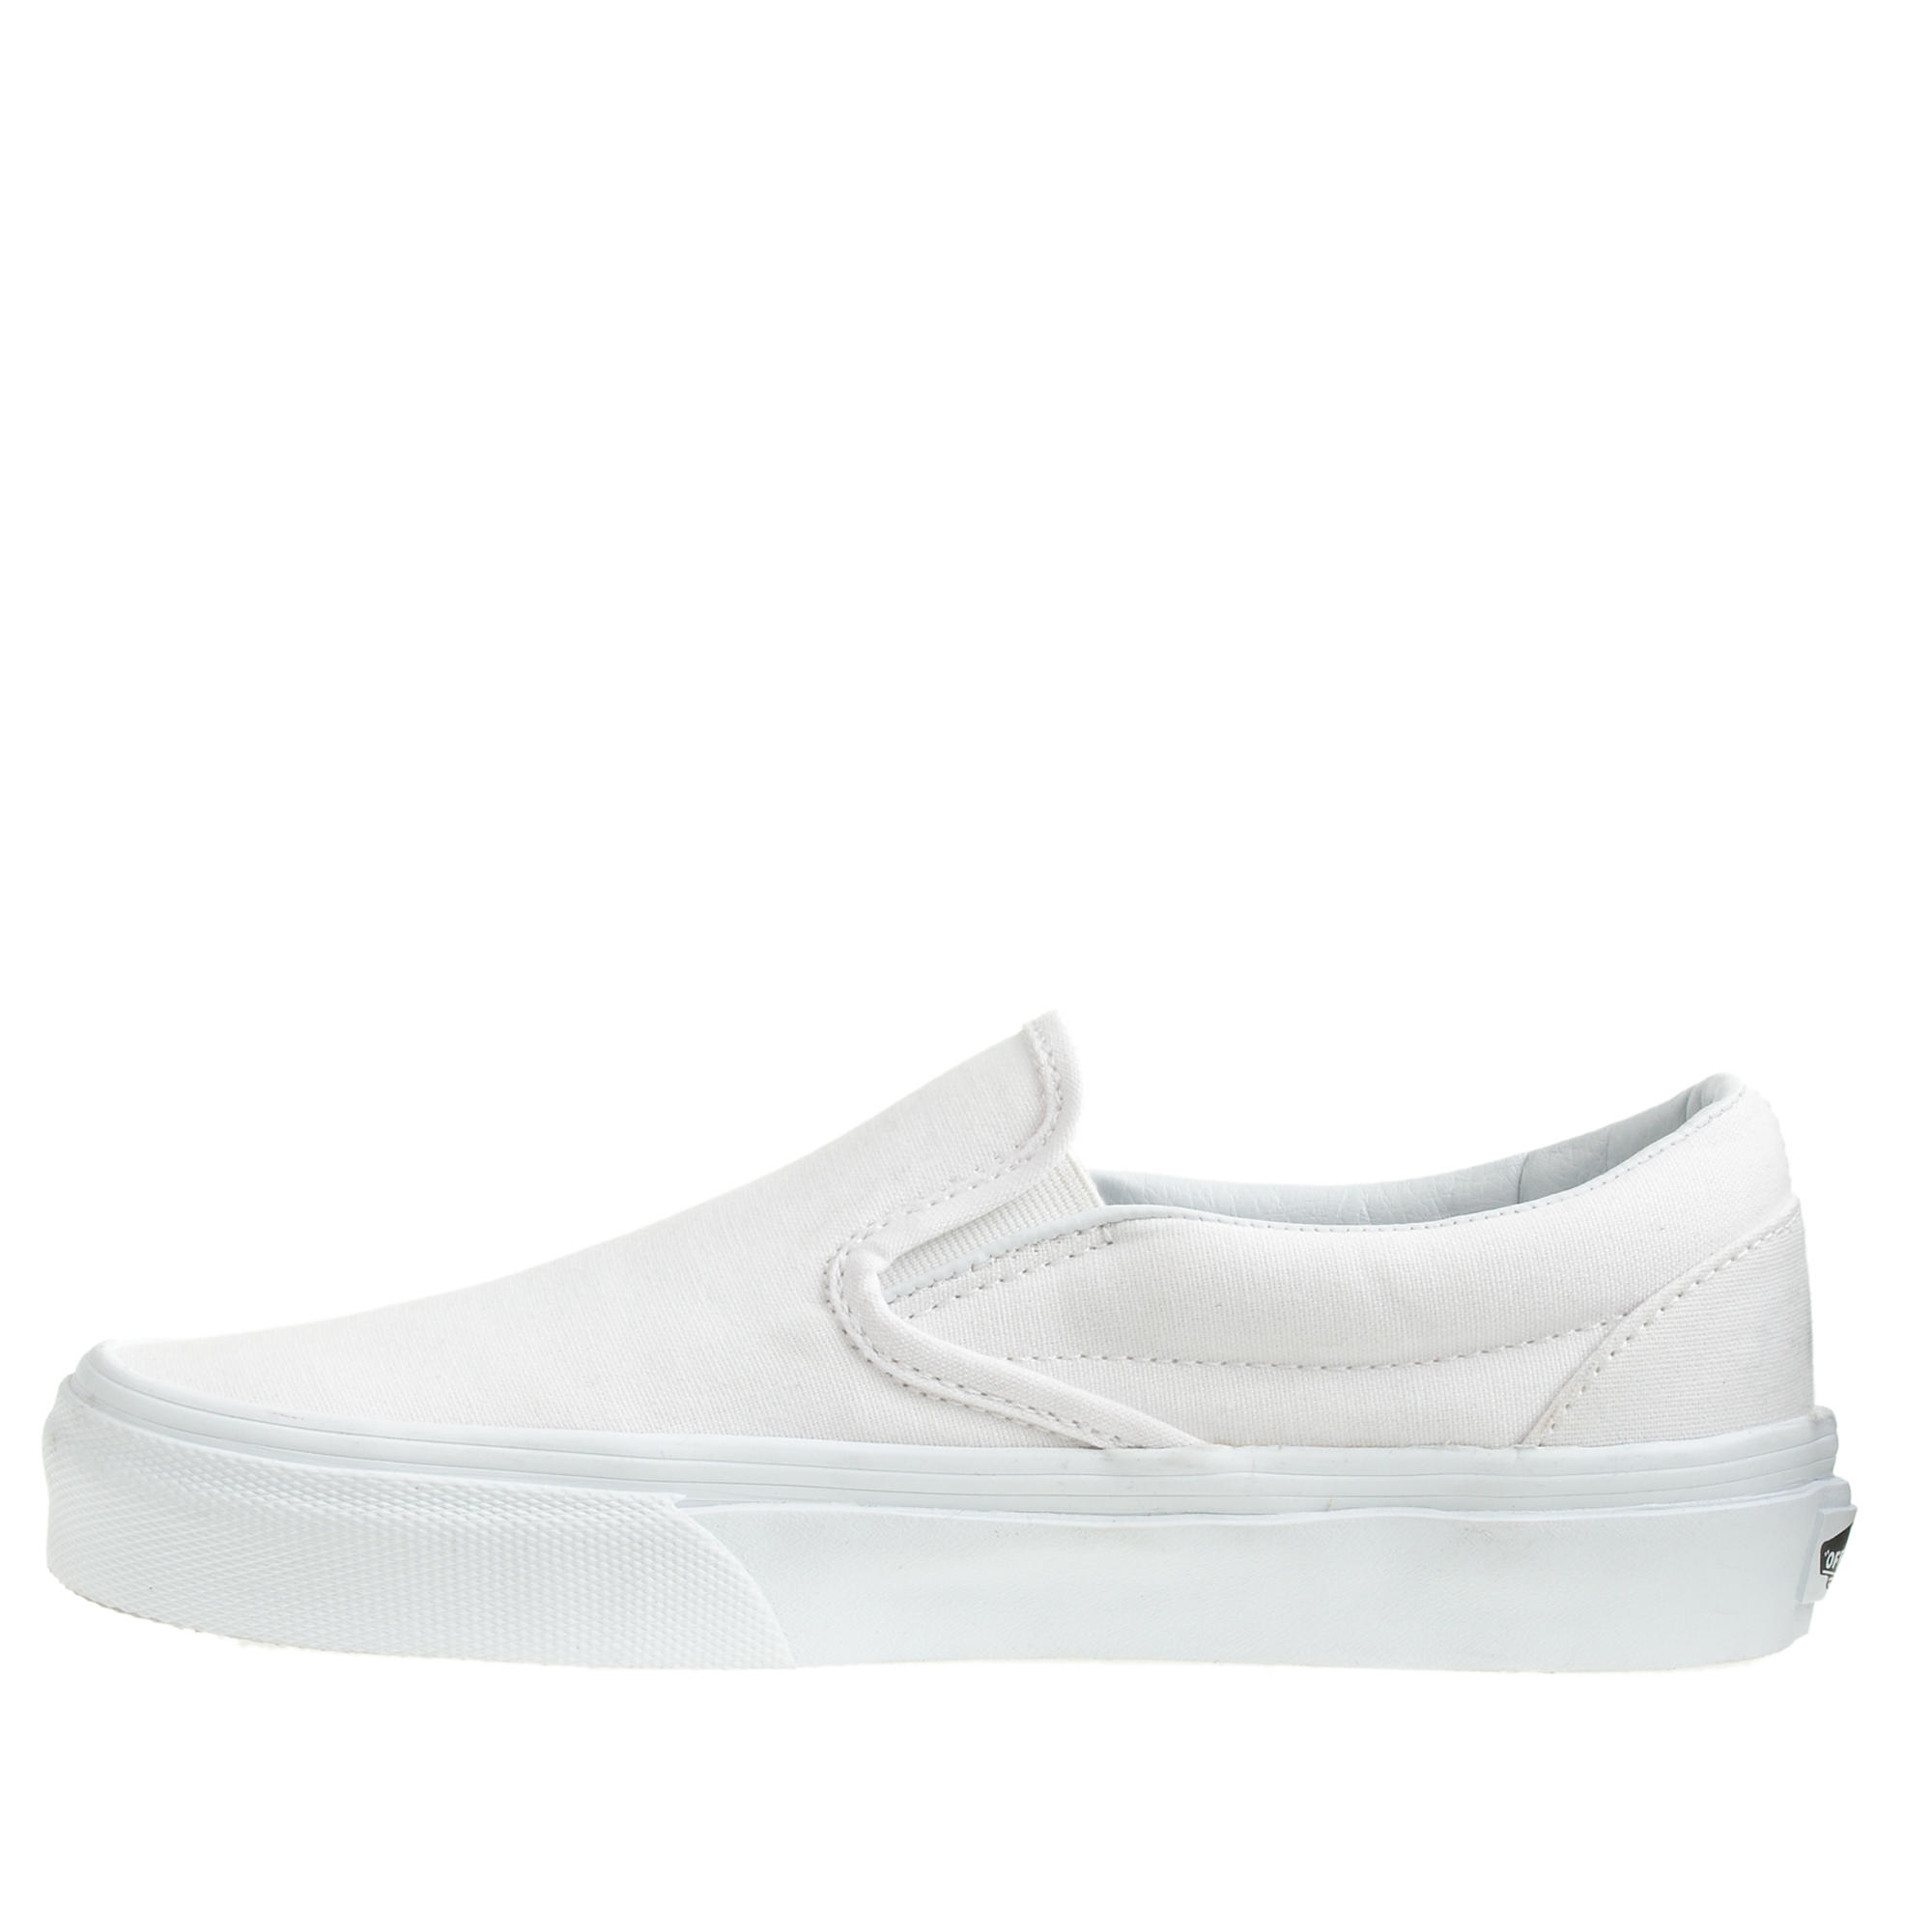 J.crew Vans Solid Canvas Classic Slip-on Sneakers In White in White | Lyst